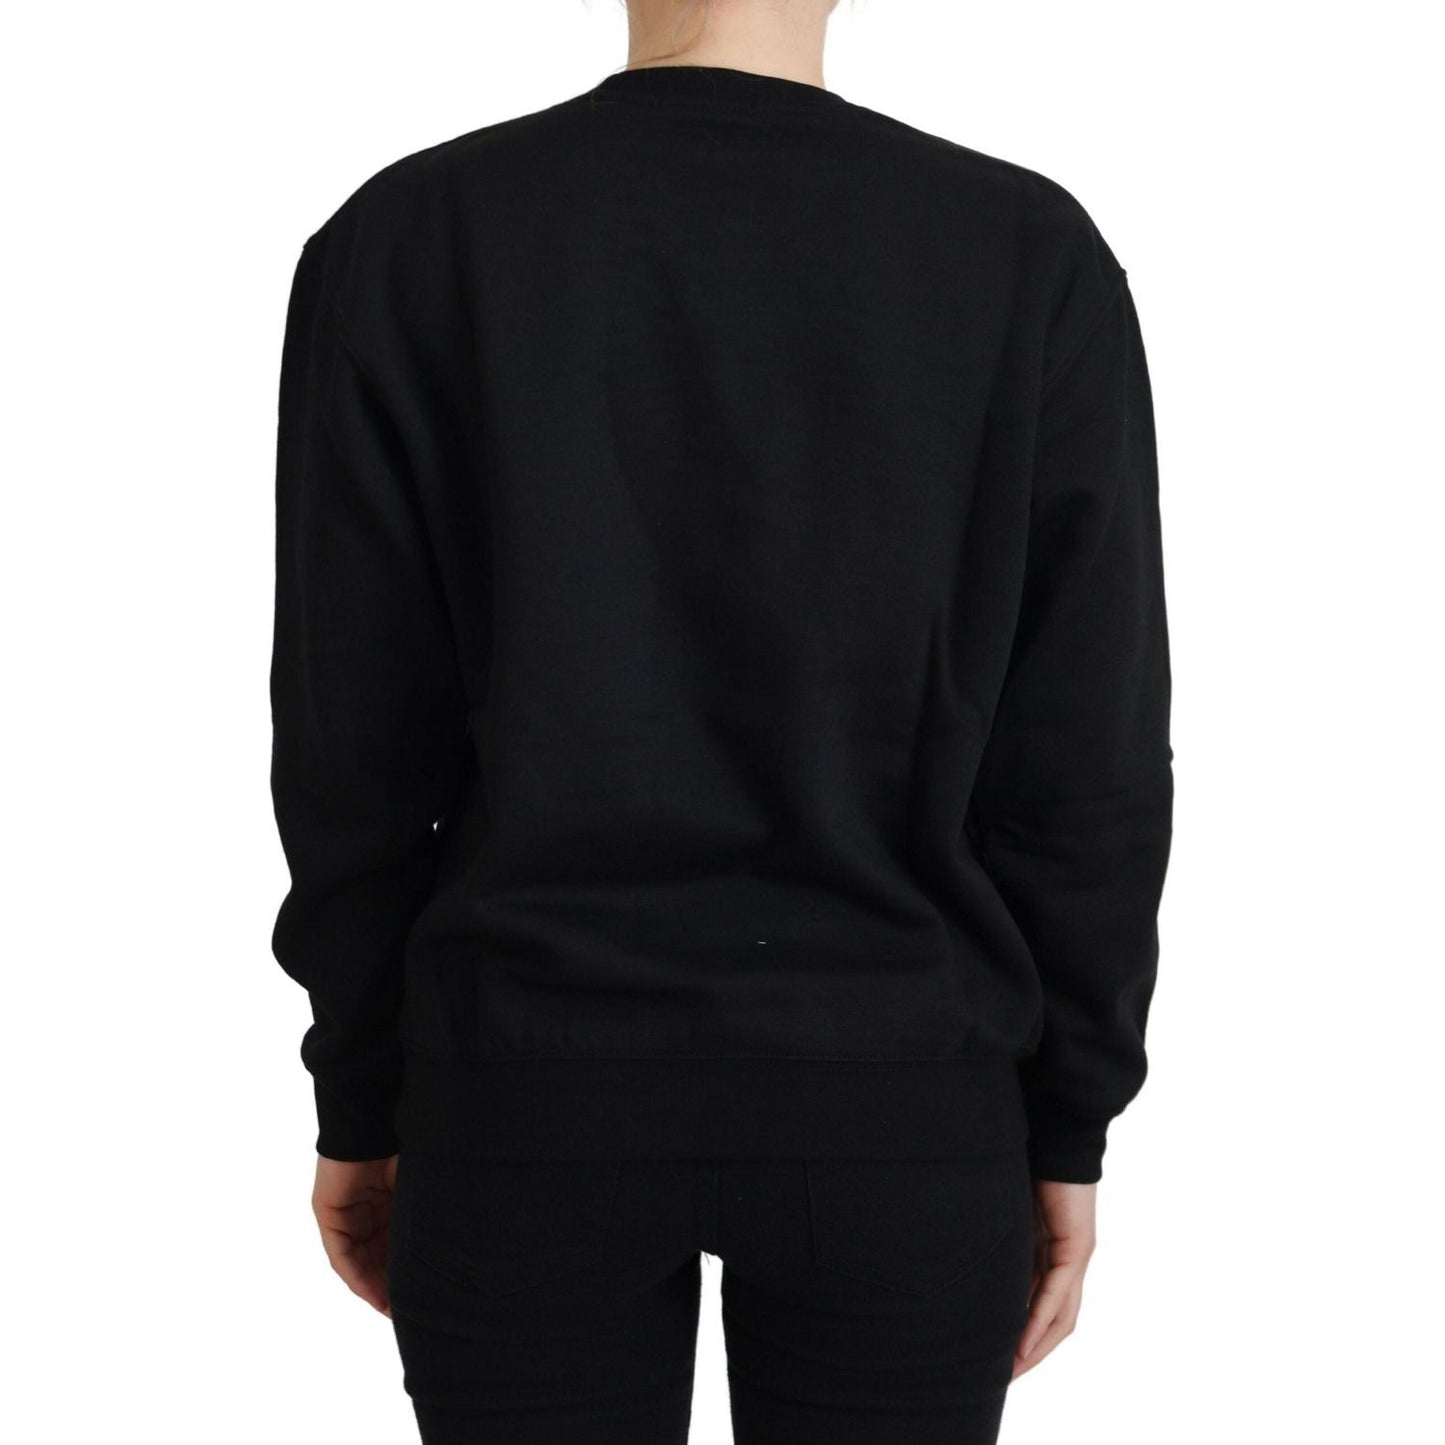 Philippe Model Chic Black Printed Cotton Sweater black-printed-long-sleeves-pullover-sweater-1